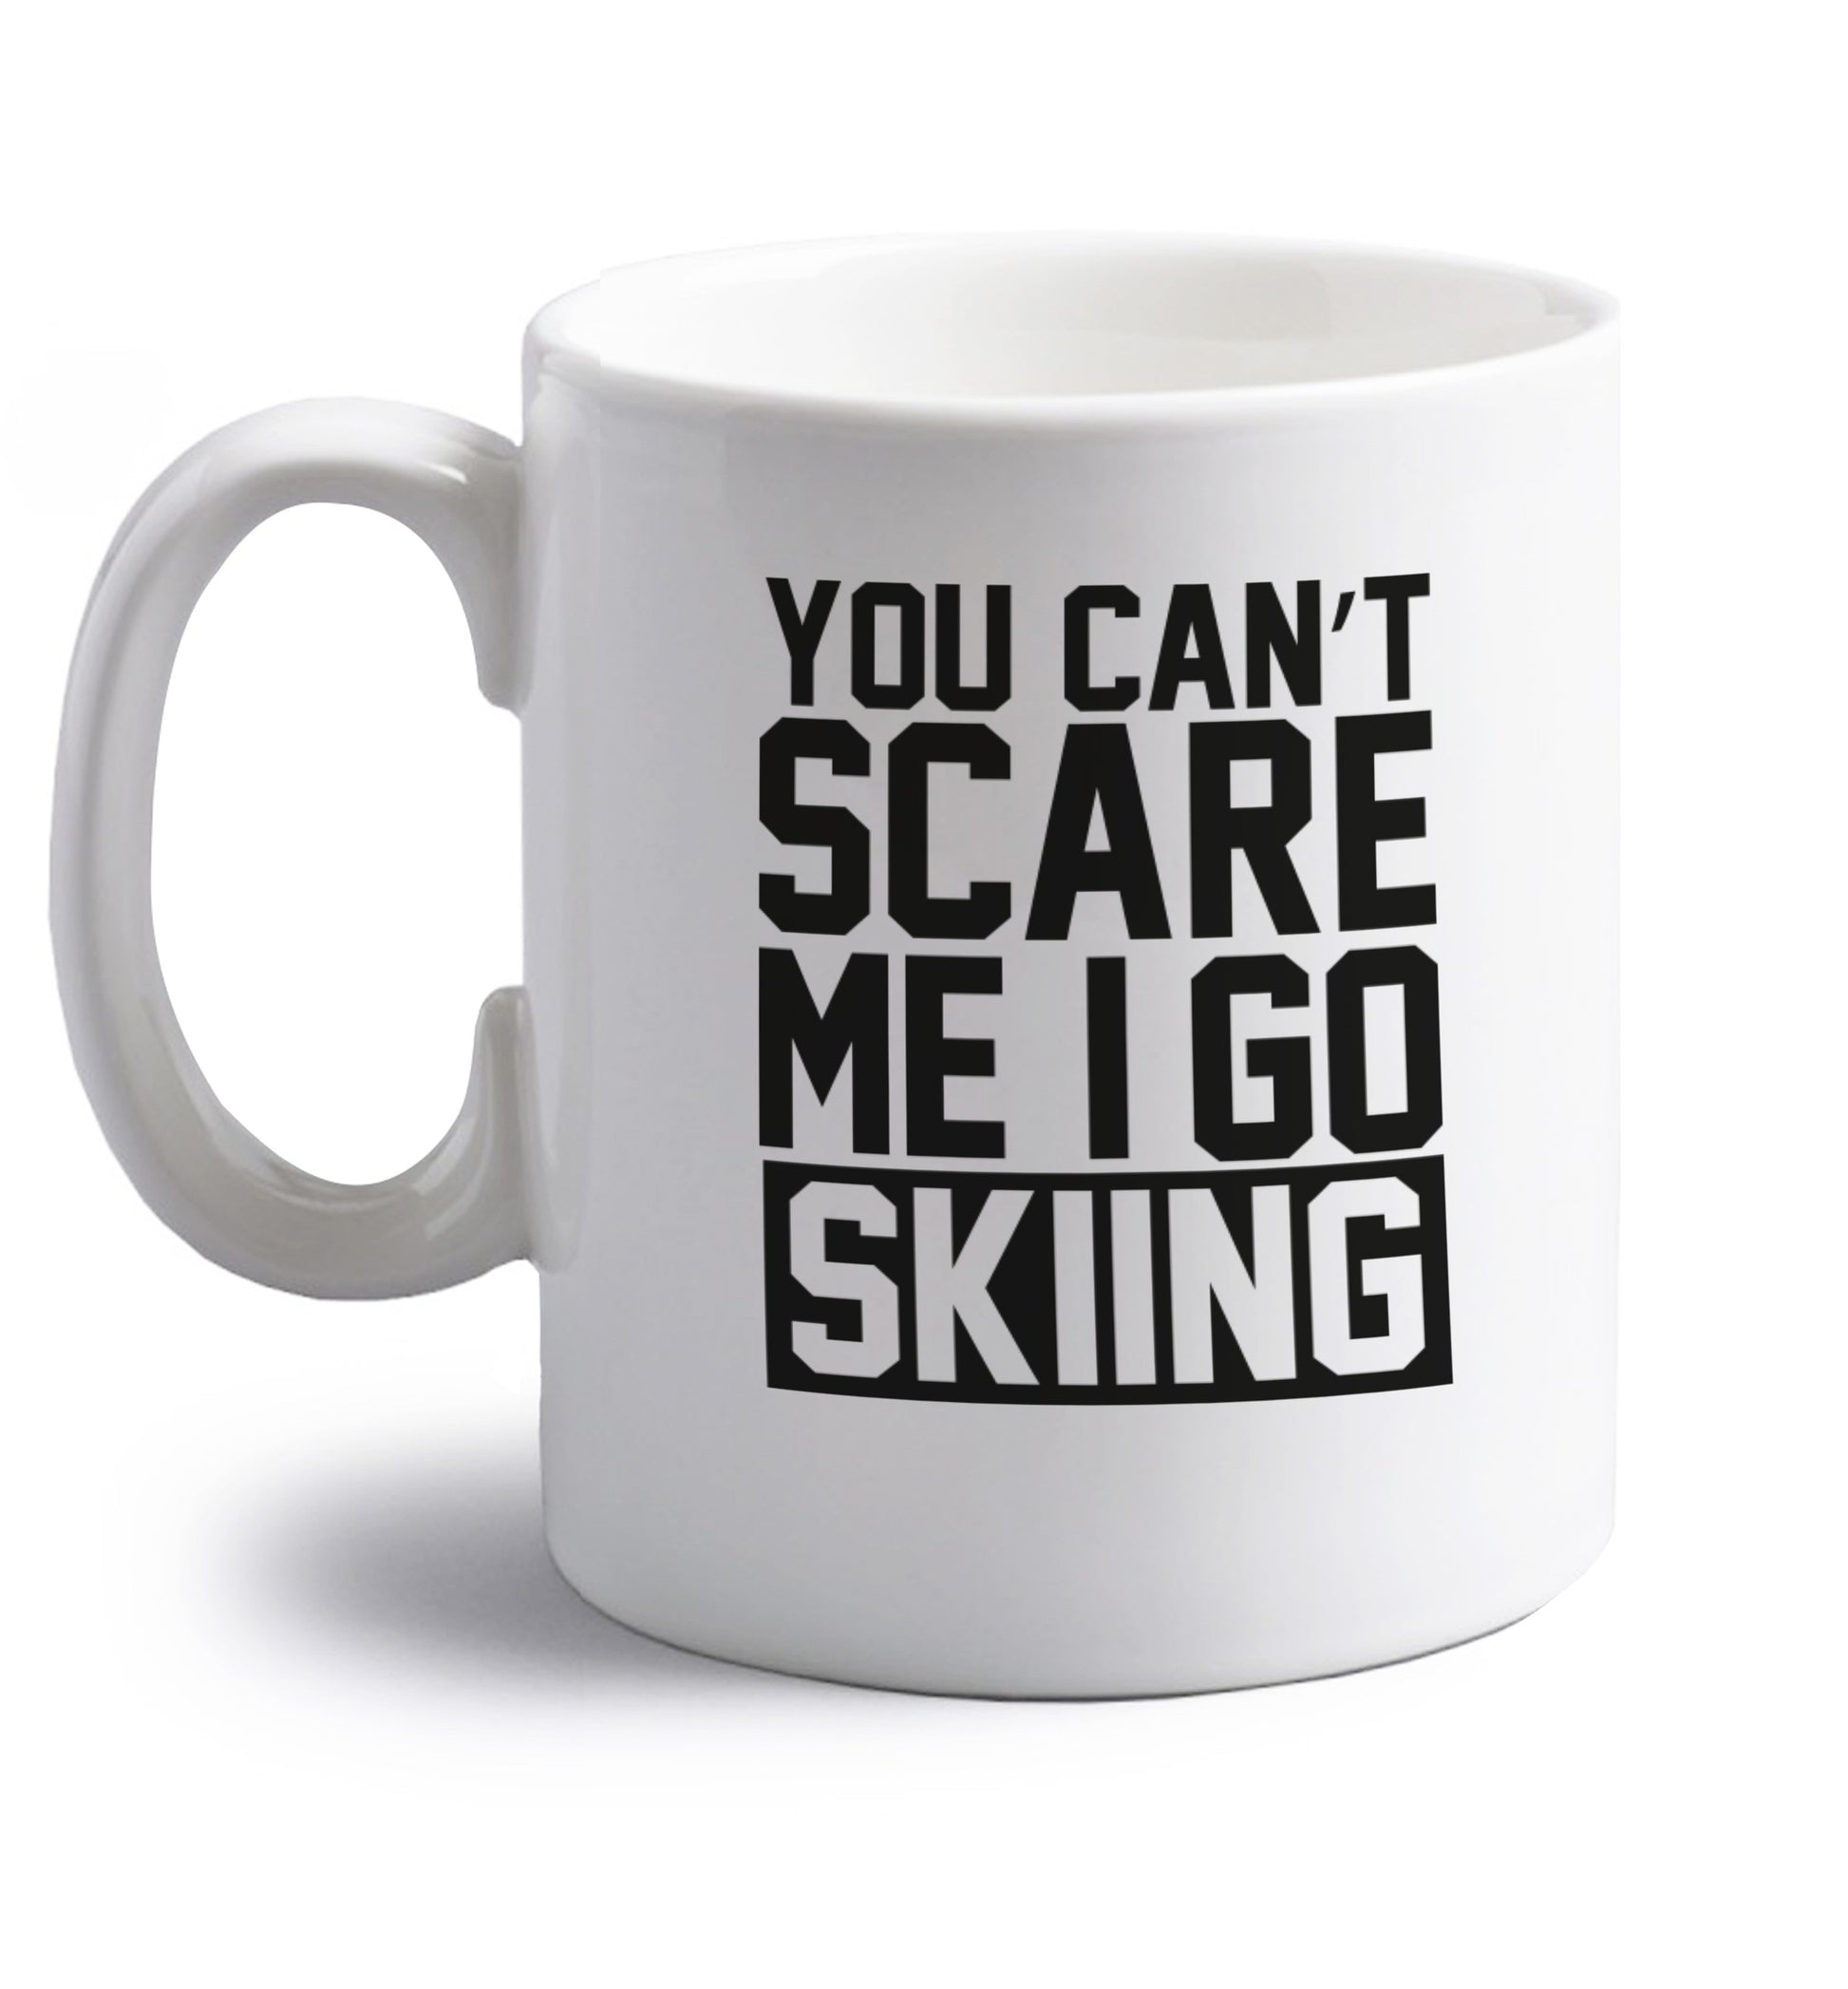 You can't scare me I go skiing right handed white ceramic mug 